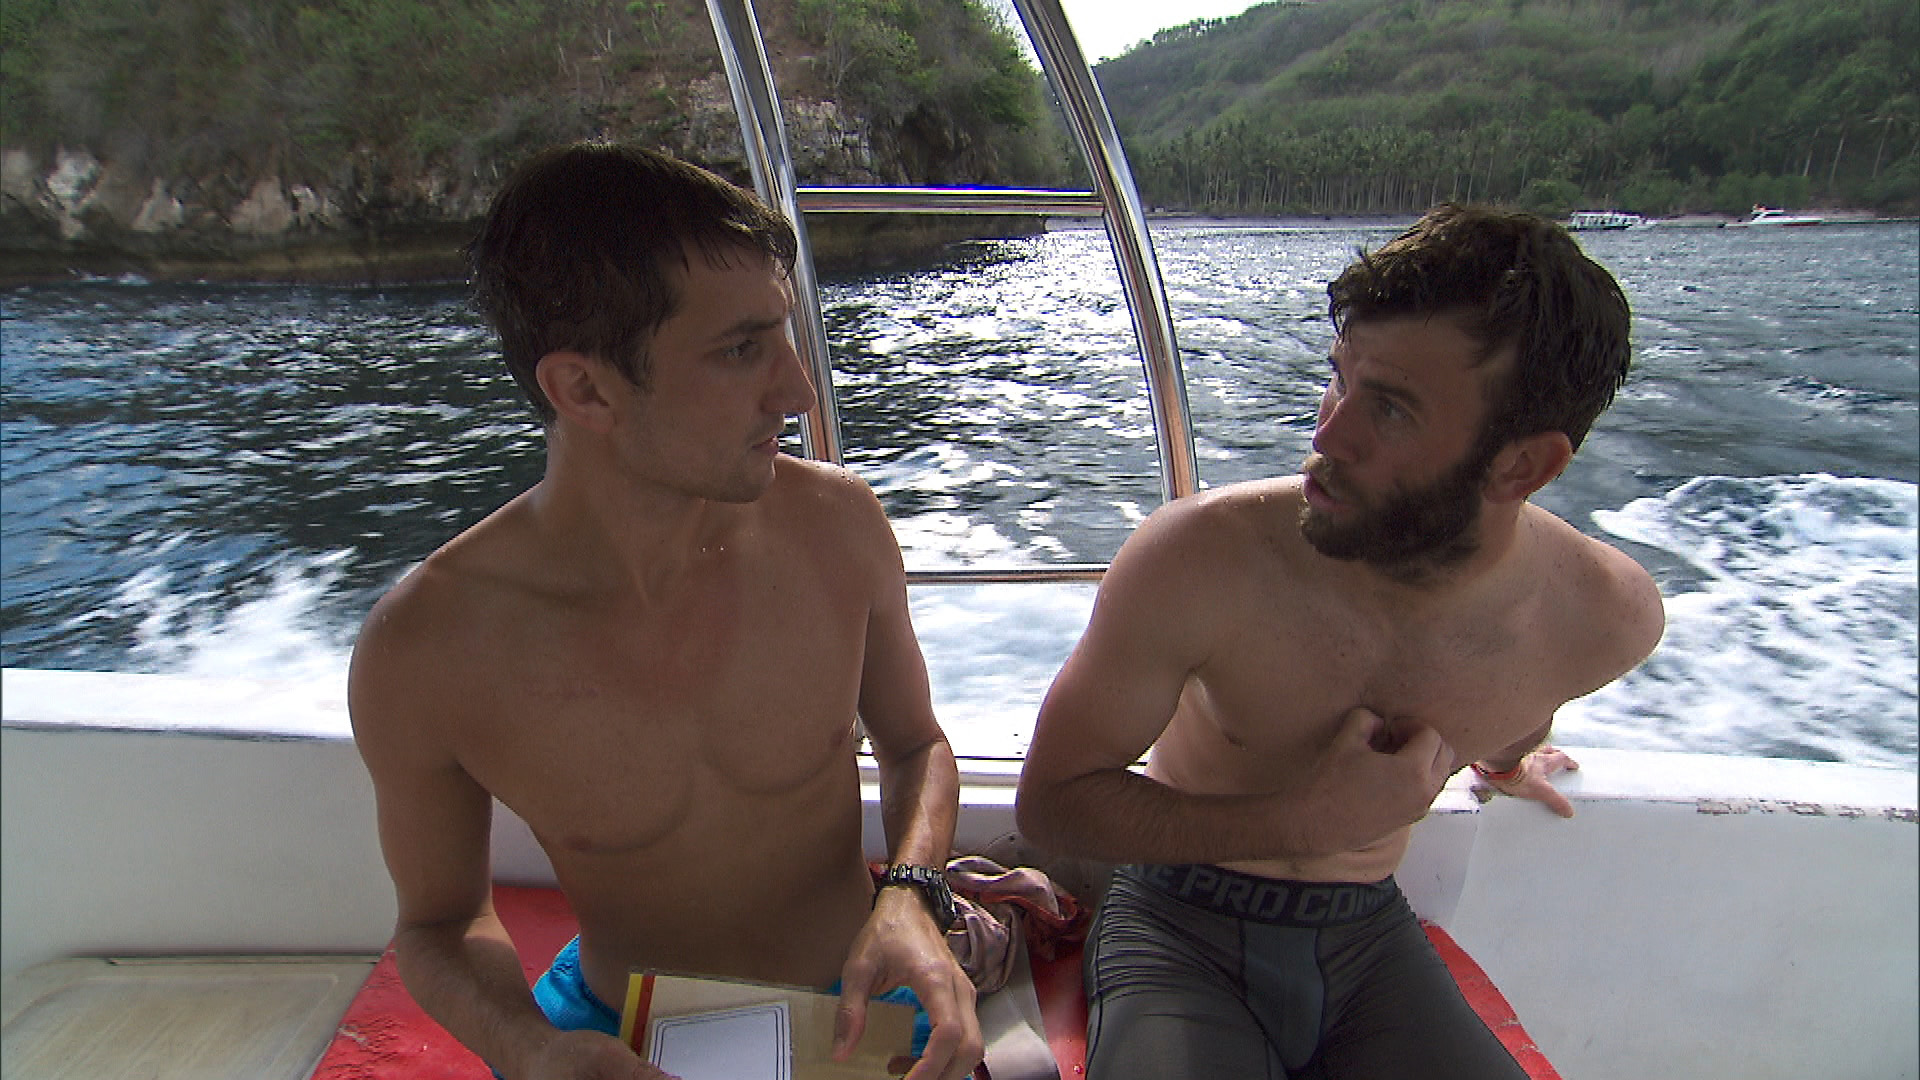 Kurt and Brodie strategize after snorkeling.